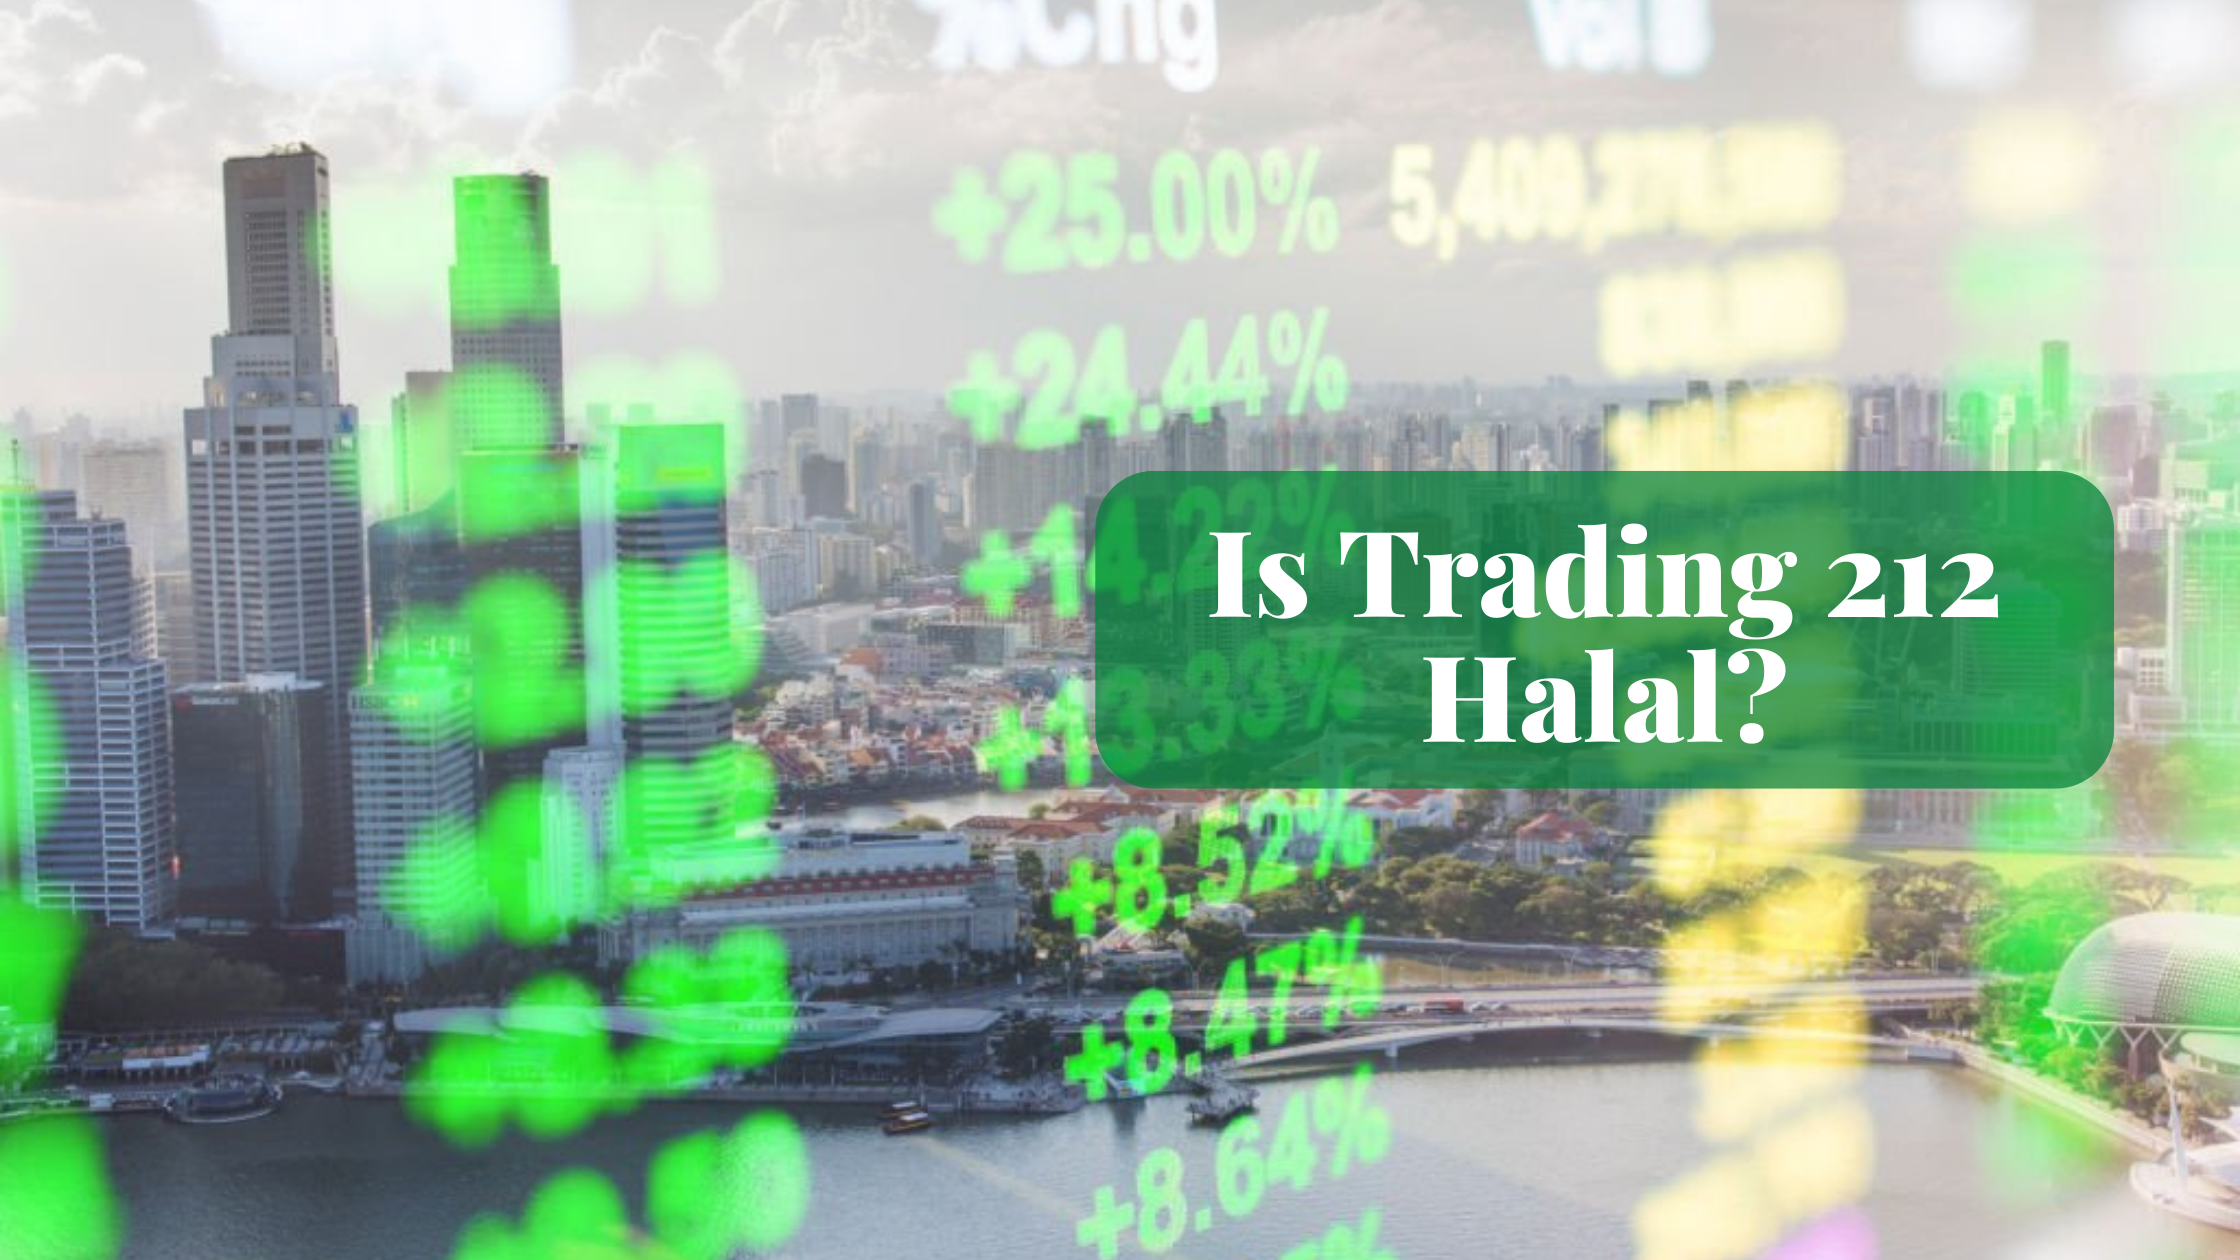 Is trading 212 halal